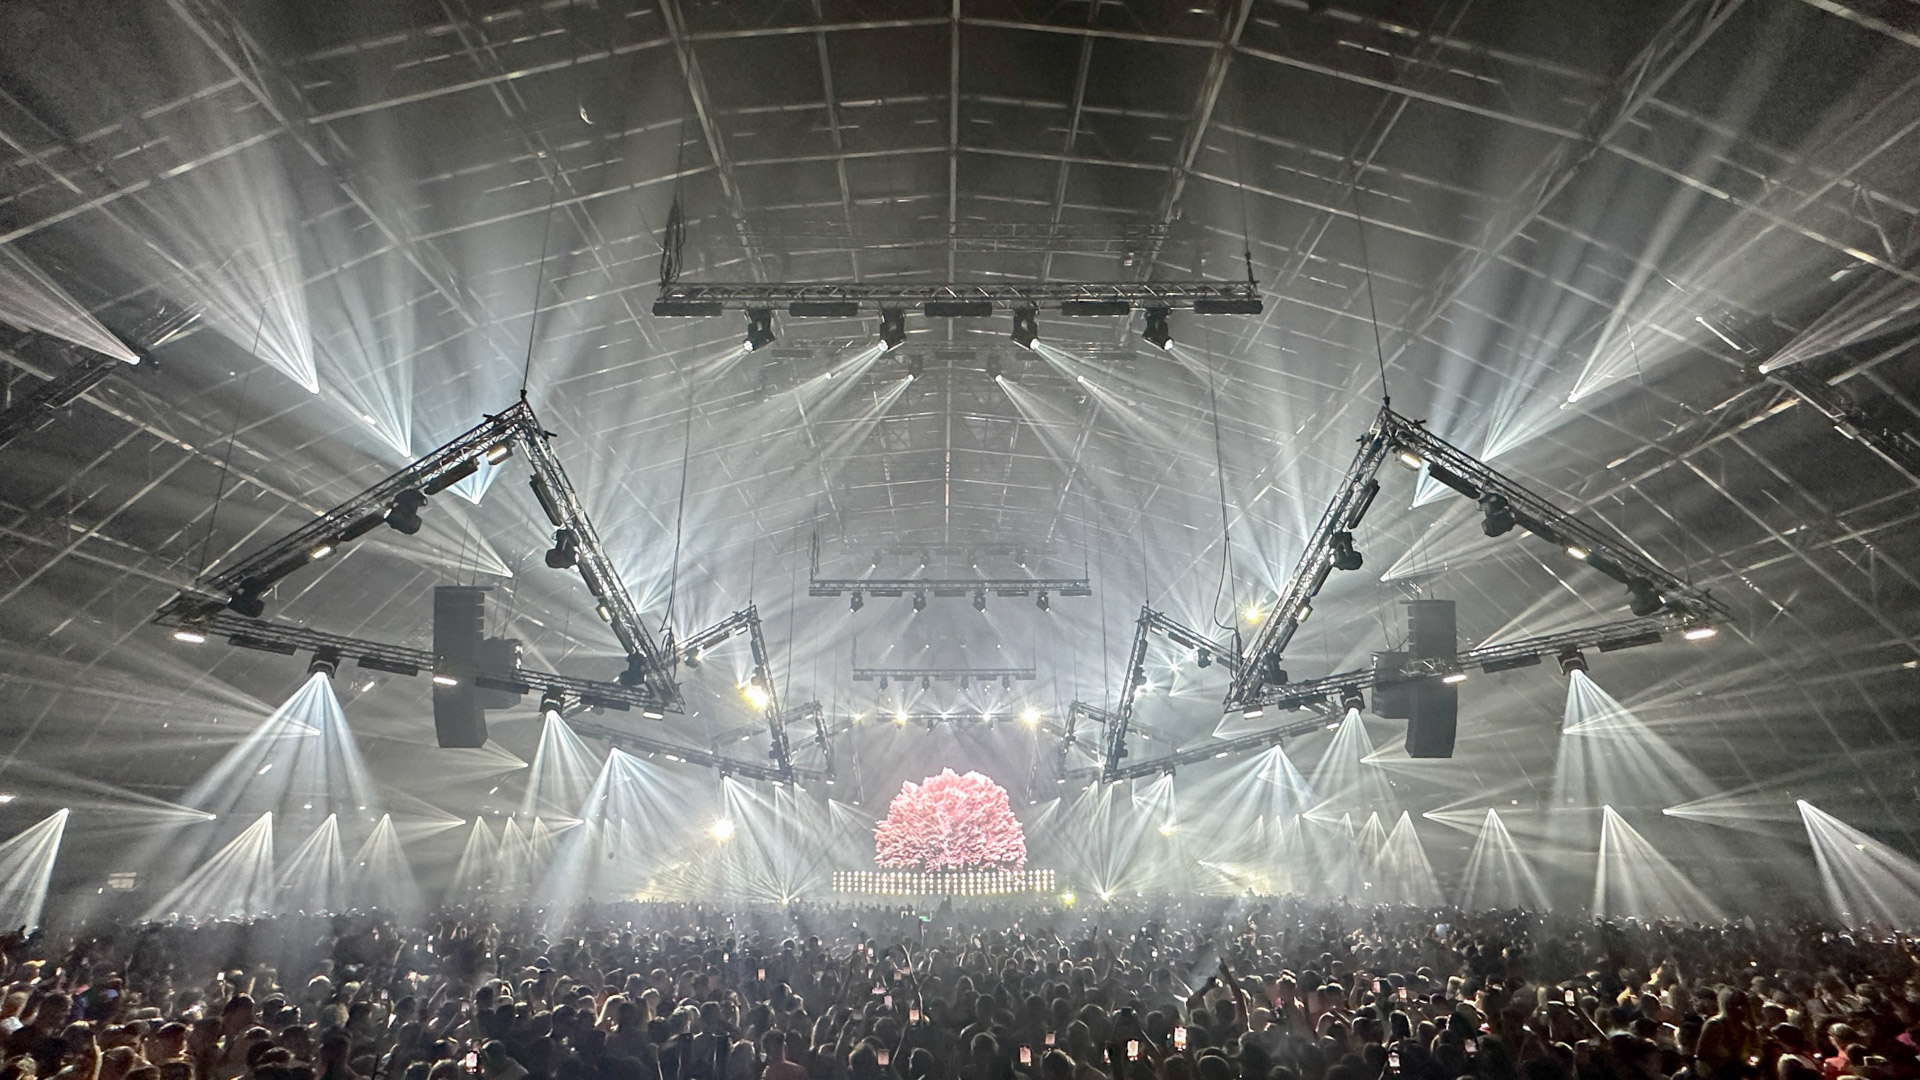 PRG continues to support Creamfield North Festival in 2023 with world-class video, lighting, rigging and automation technology.